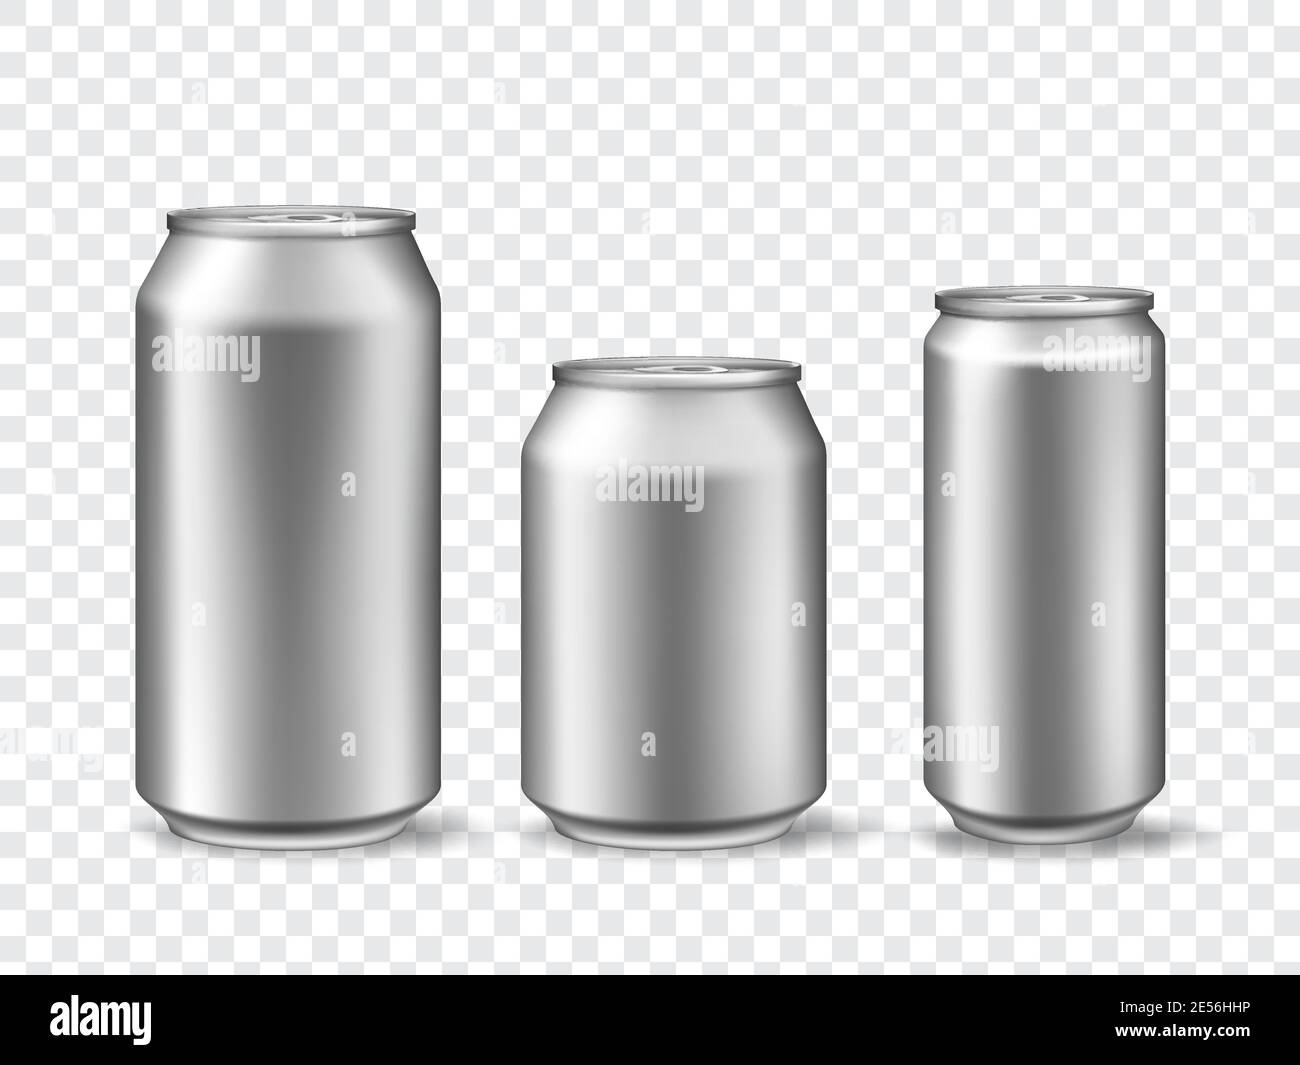 3d aluminum cans. Realistic can mockups in 3 size. Metallic tin for beer, juice, soda drink or lemonade. Canned beverage vector template set Stock Vector